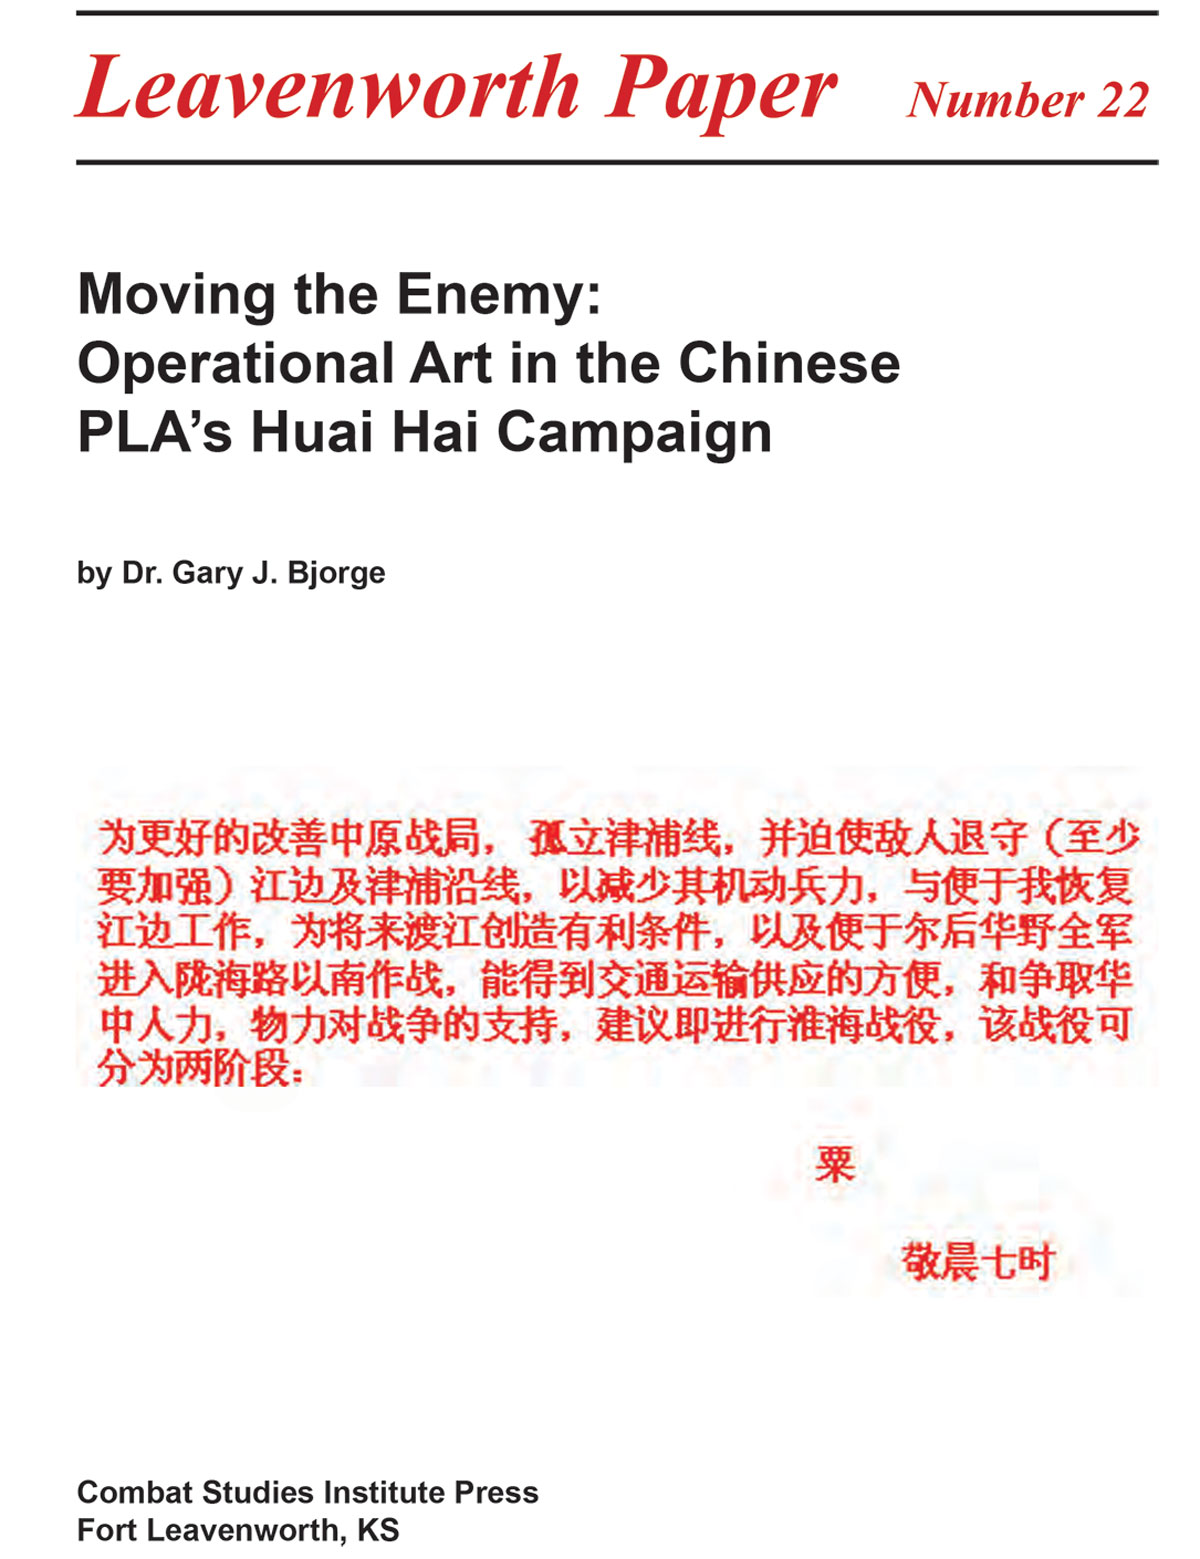 Moving the Enemy: Operational Art in the Chinese PLA’s Huai Hai Campaign